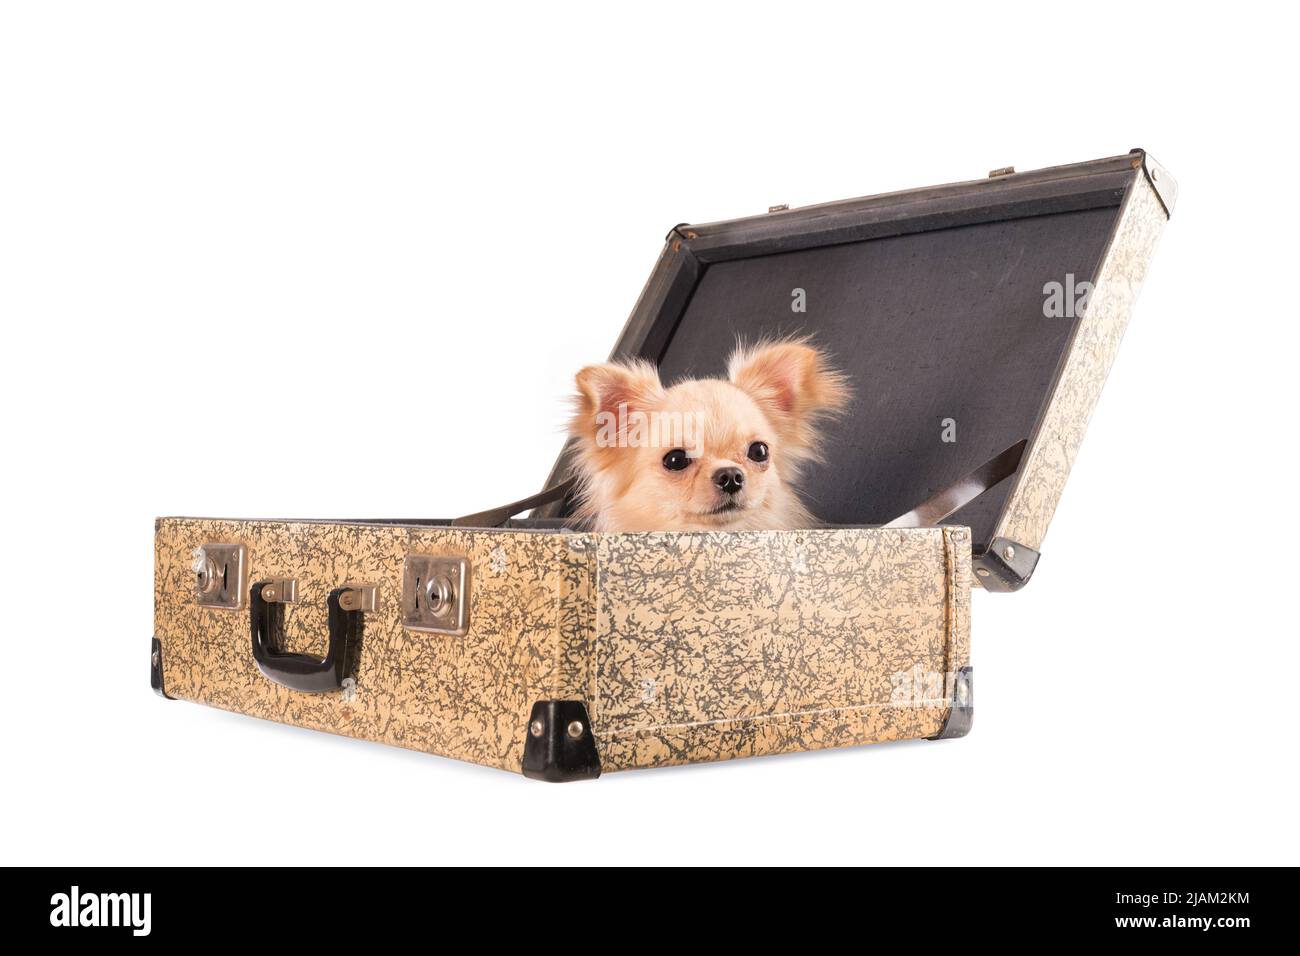 Small chihuahua dog sitting in an old suitcase. Isolated on white, clipping path included Stock Photo